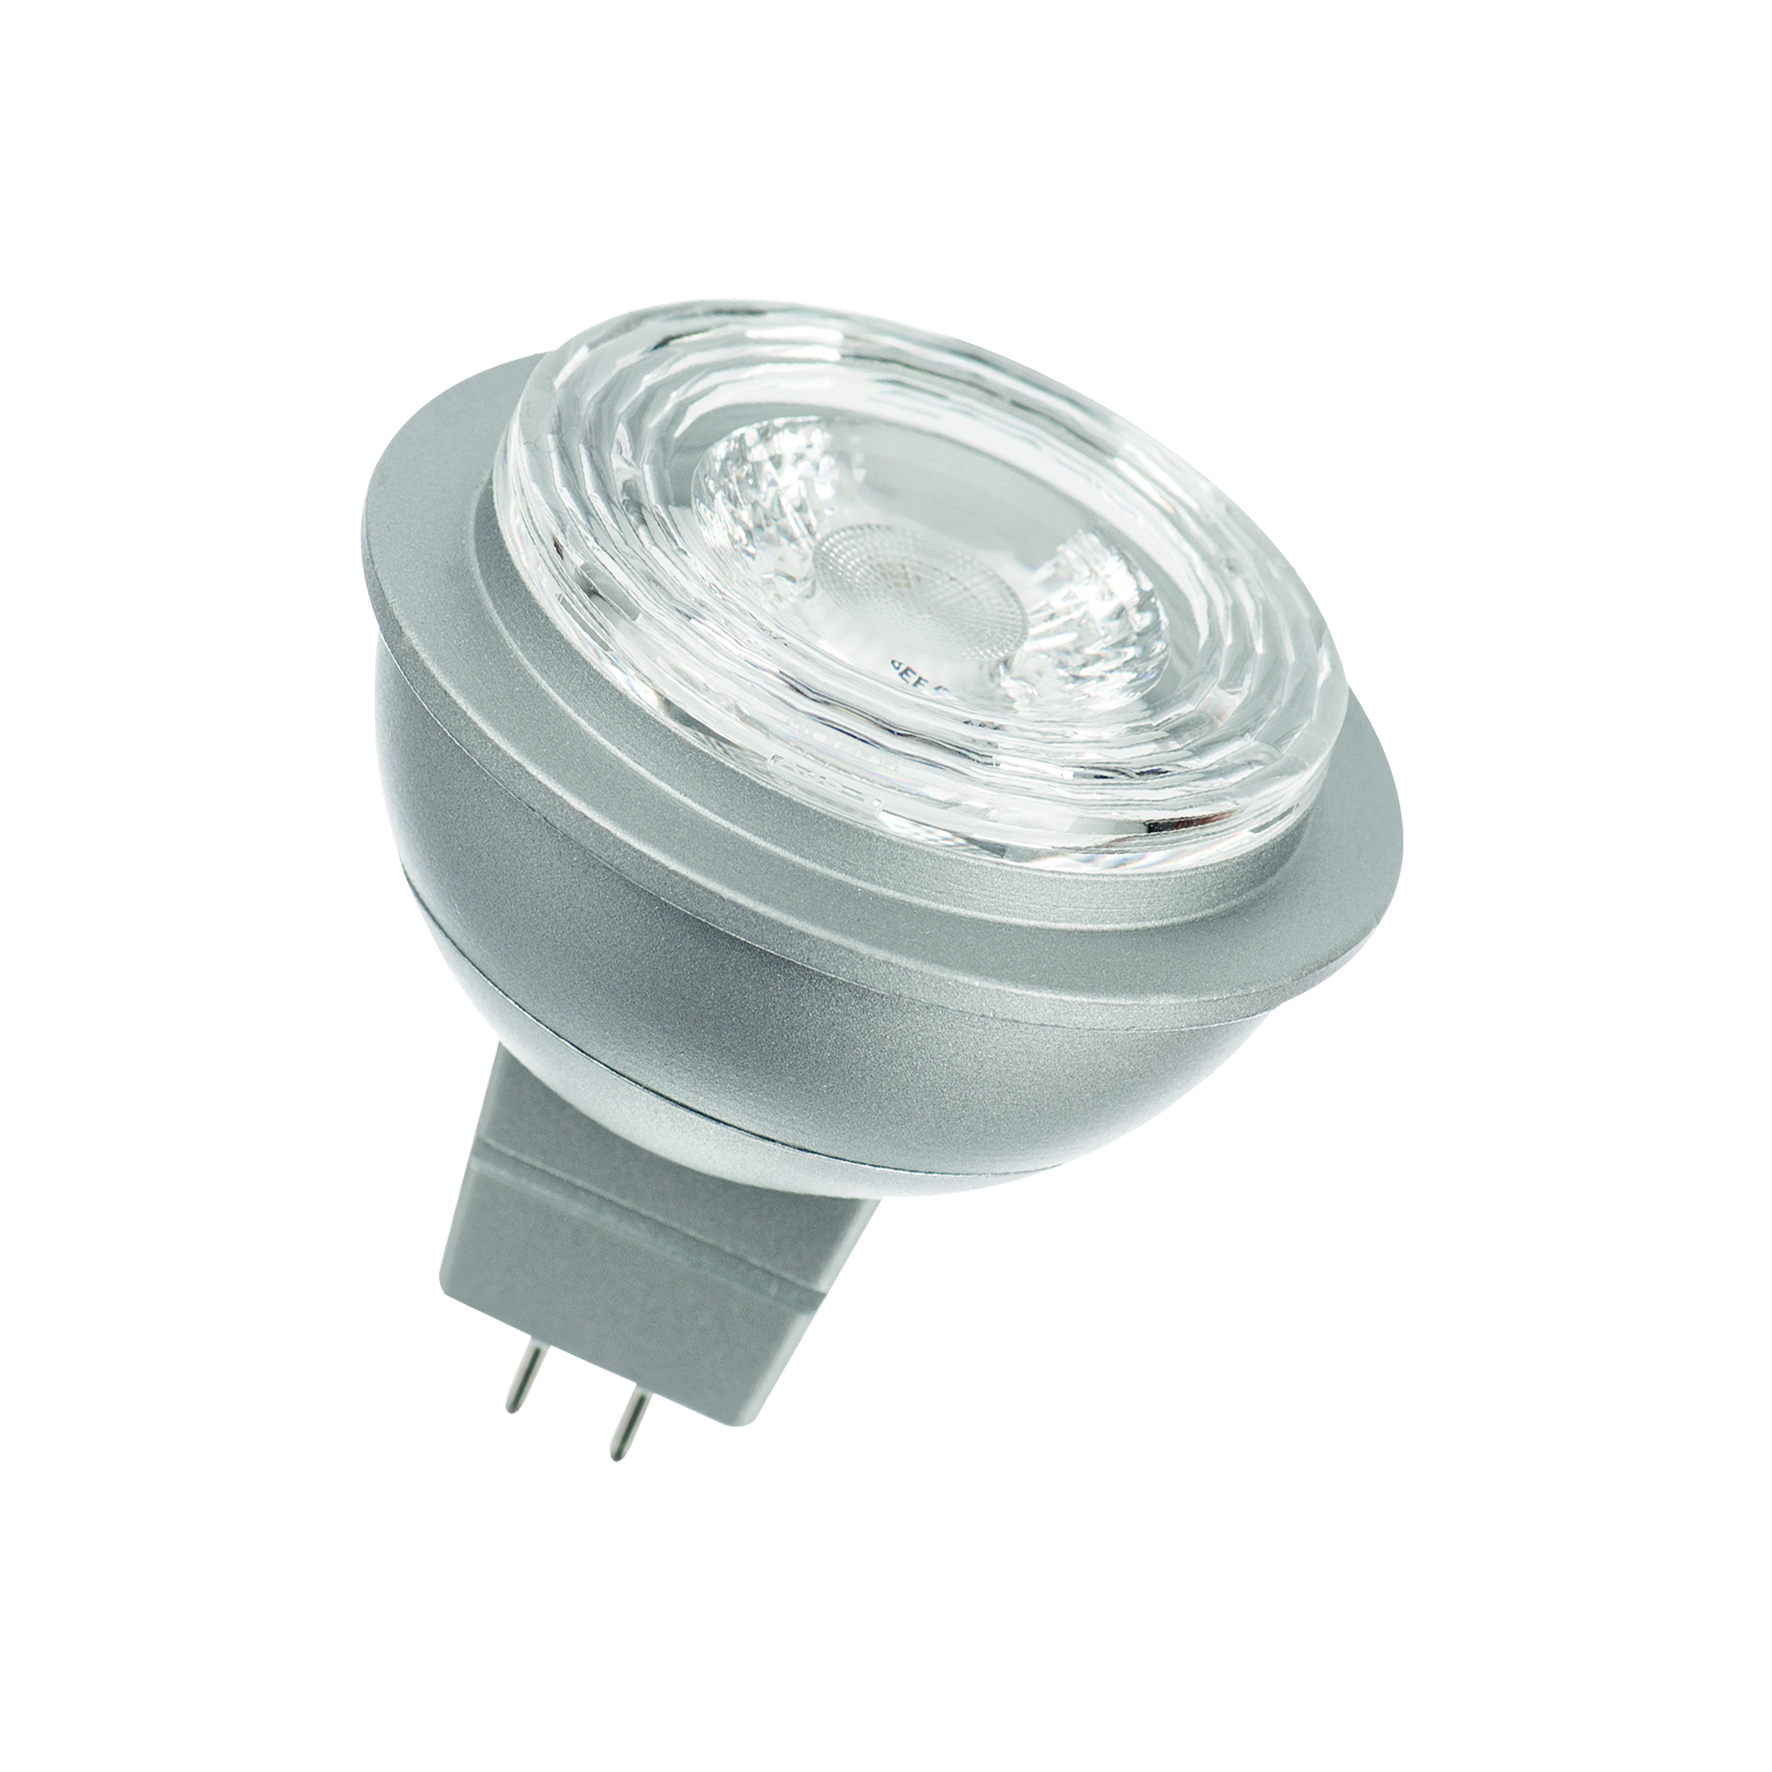 LED7XD MR16 GU5.3 7W/830 25D Dimmable